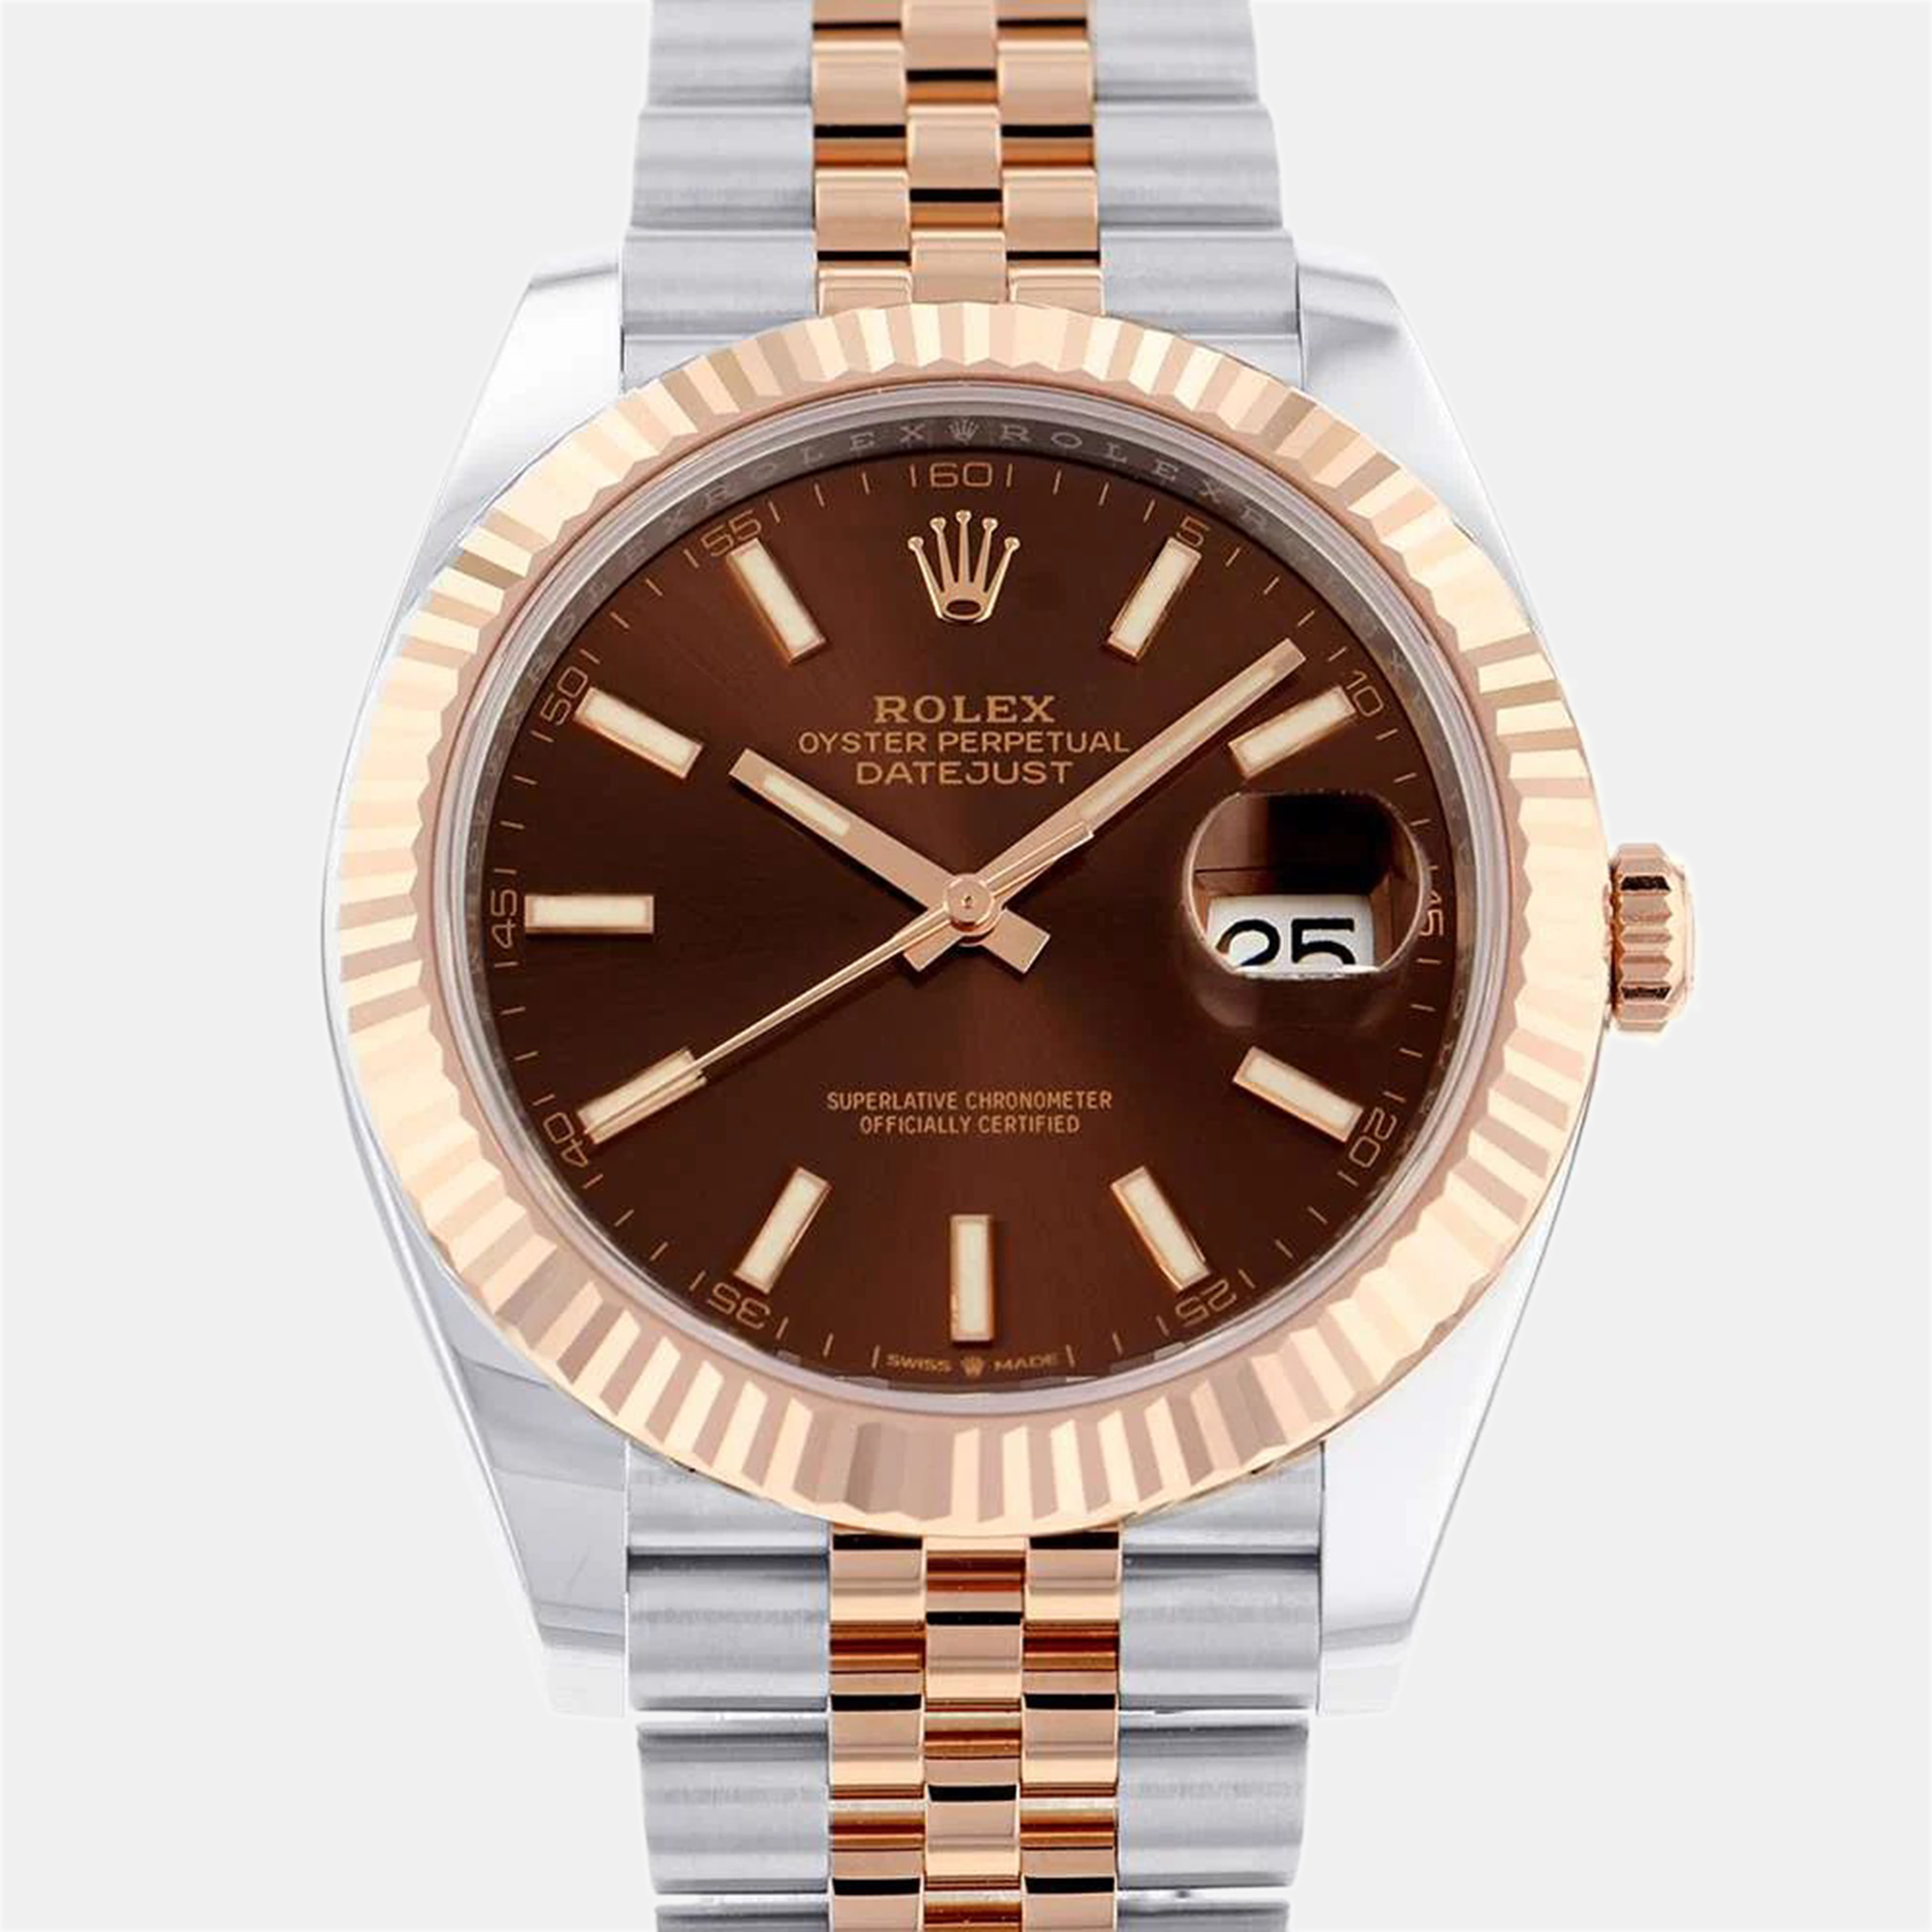 Rolex Brown 18k Rose Gold And Stainless Steel Datejust 126331 Automatic Men's Wristwatch 41 Mm